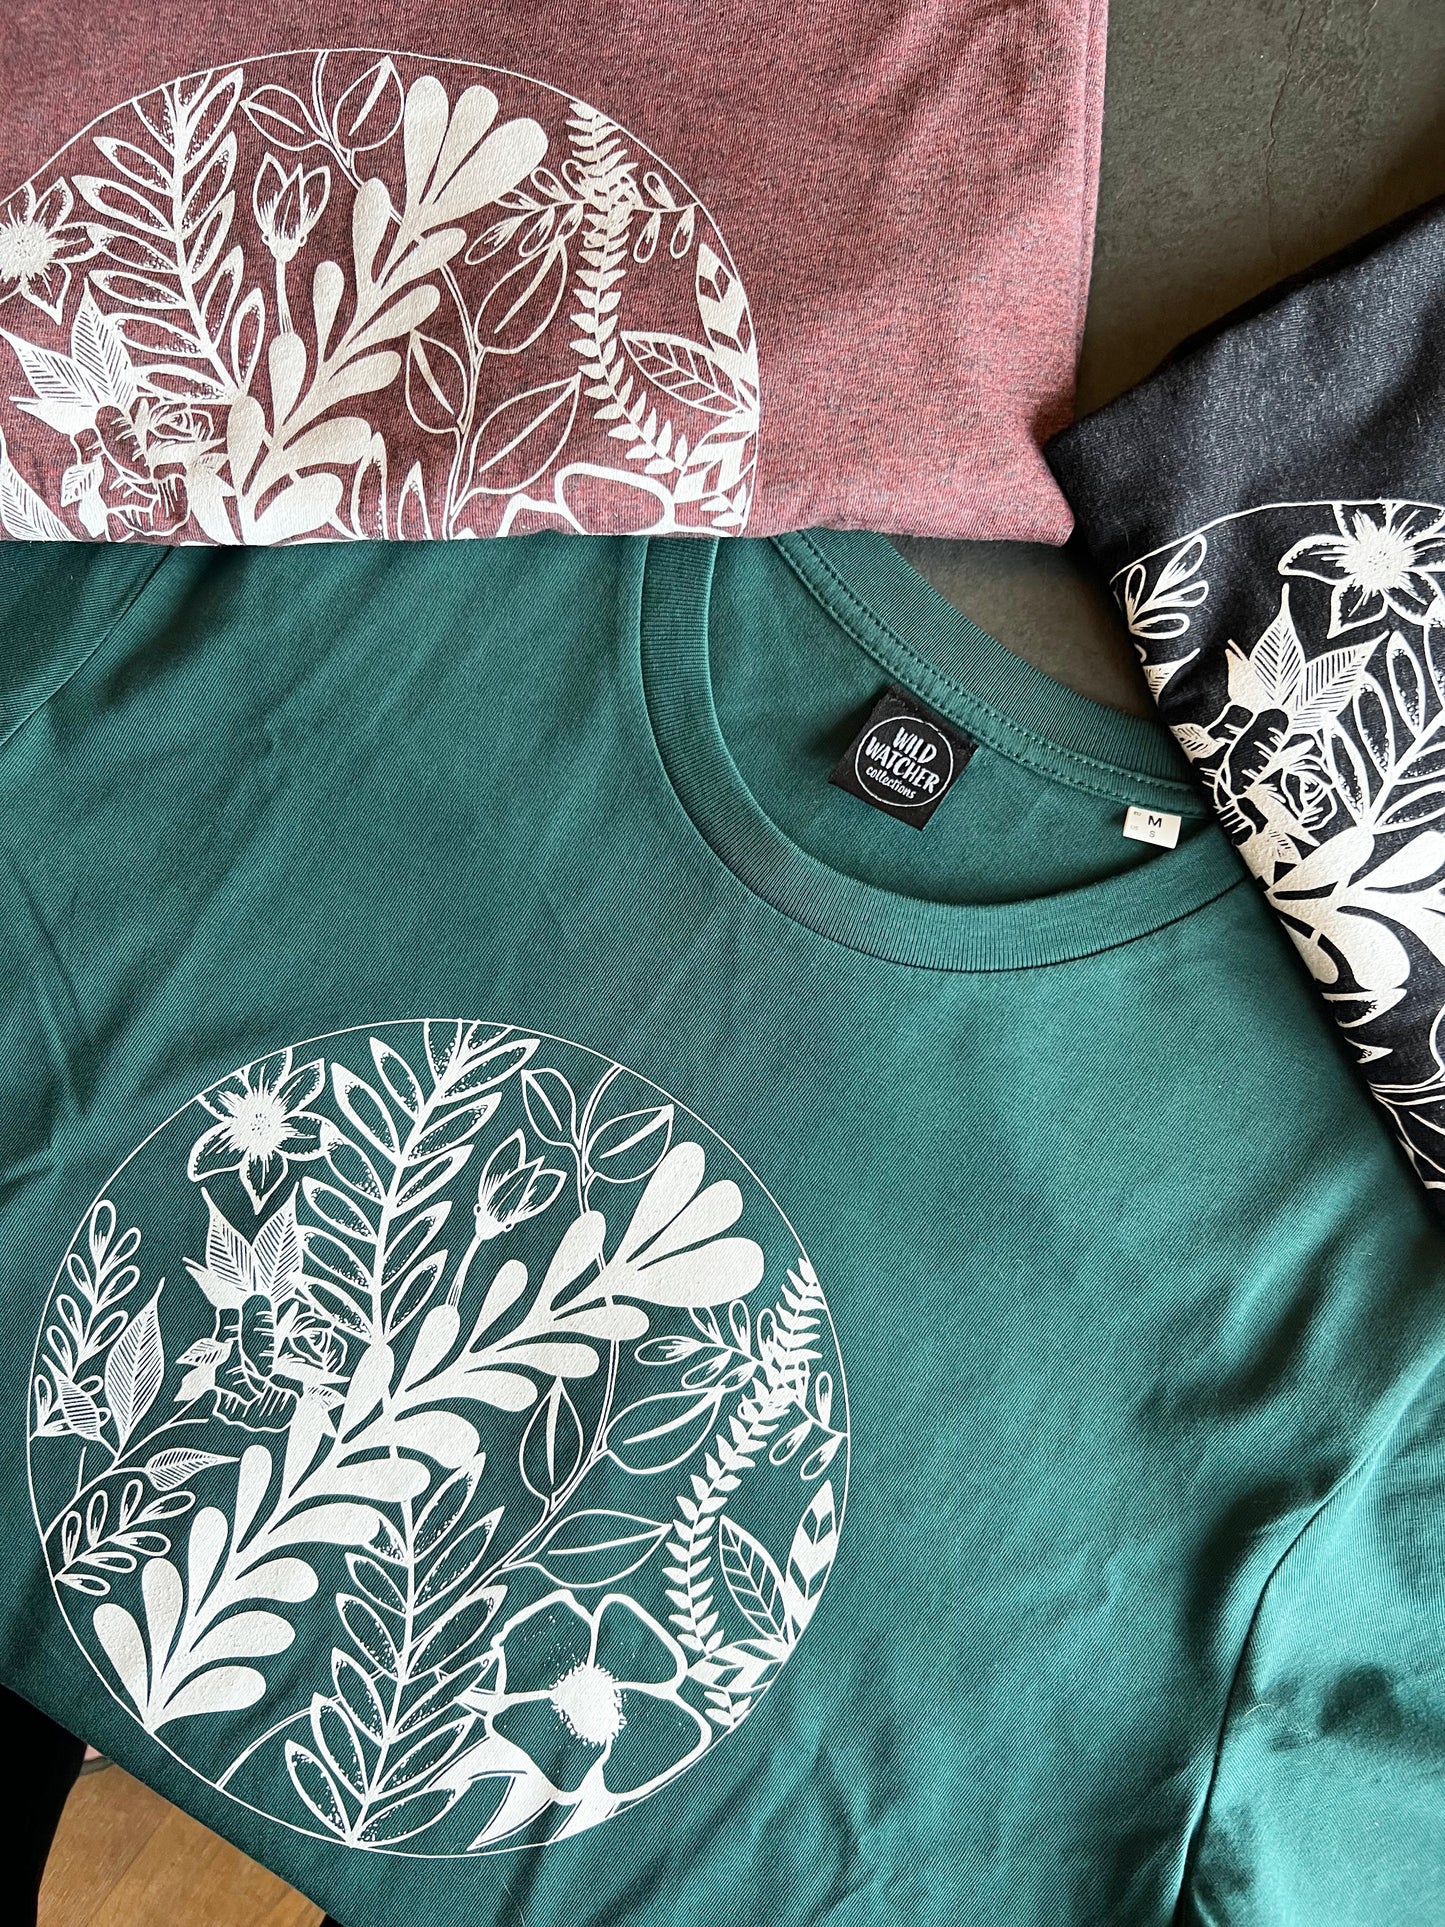 Floral Infinity Organic Unisex Tee's - Includes a free notebook!